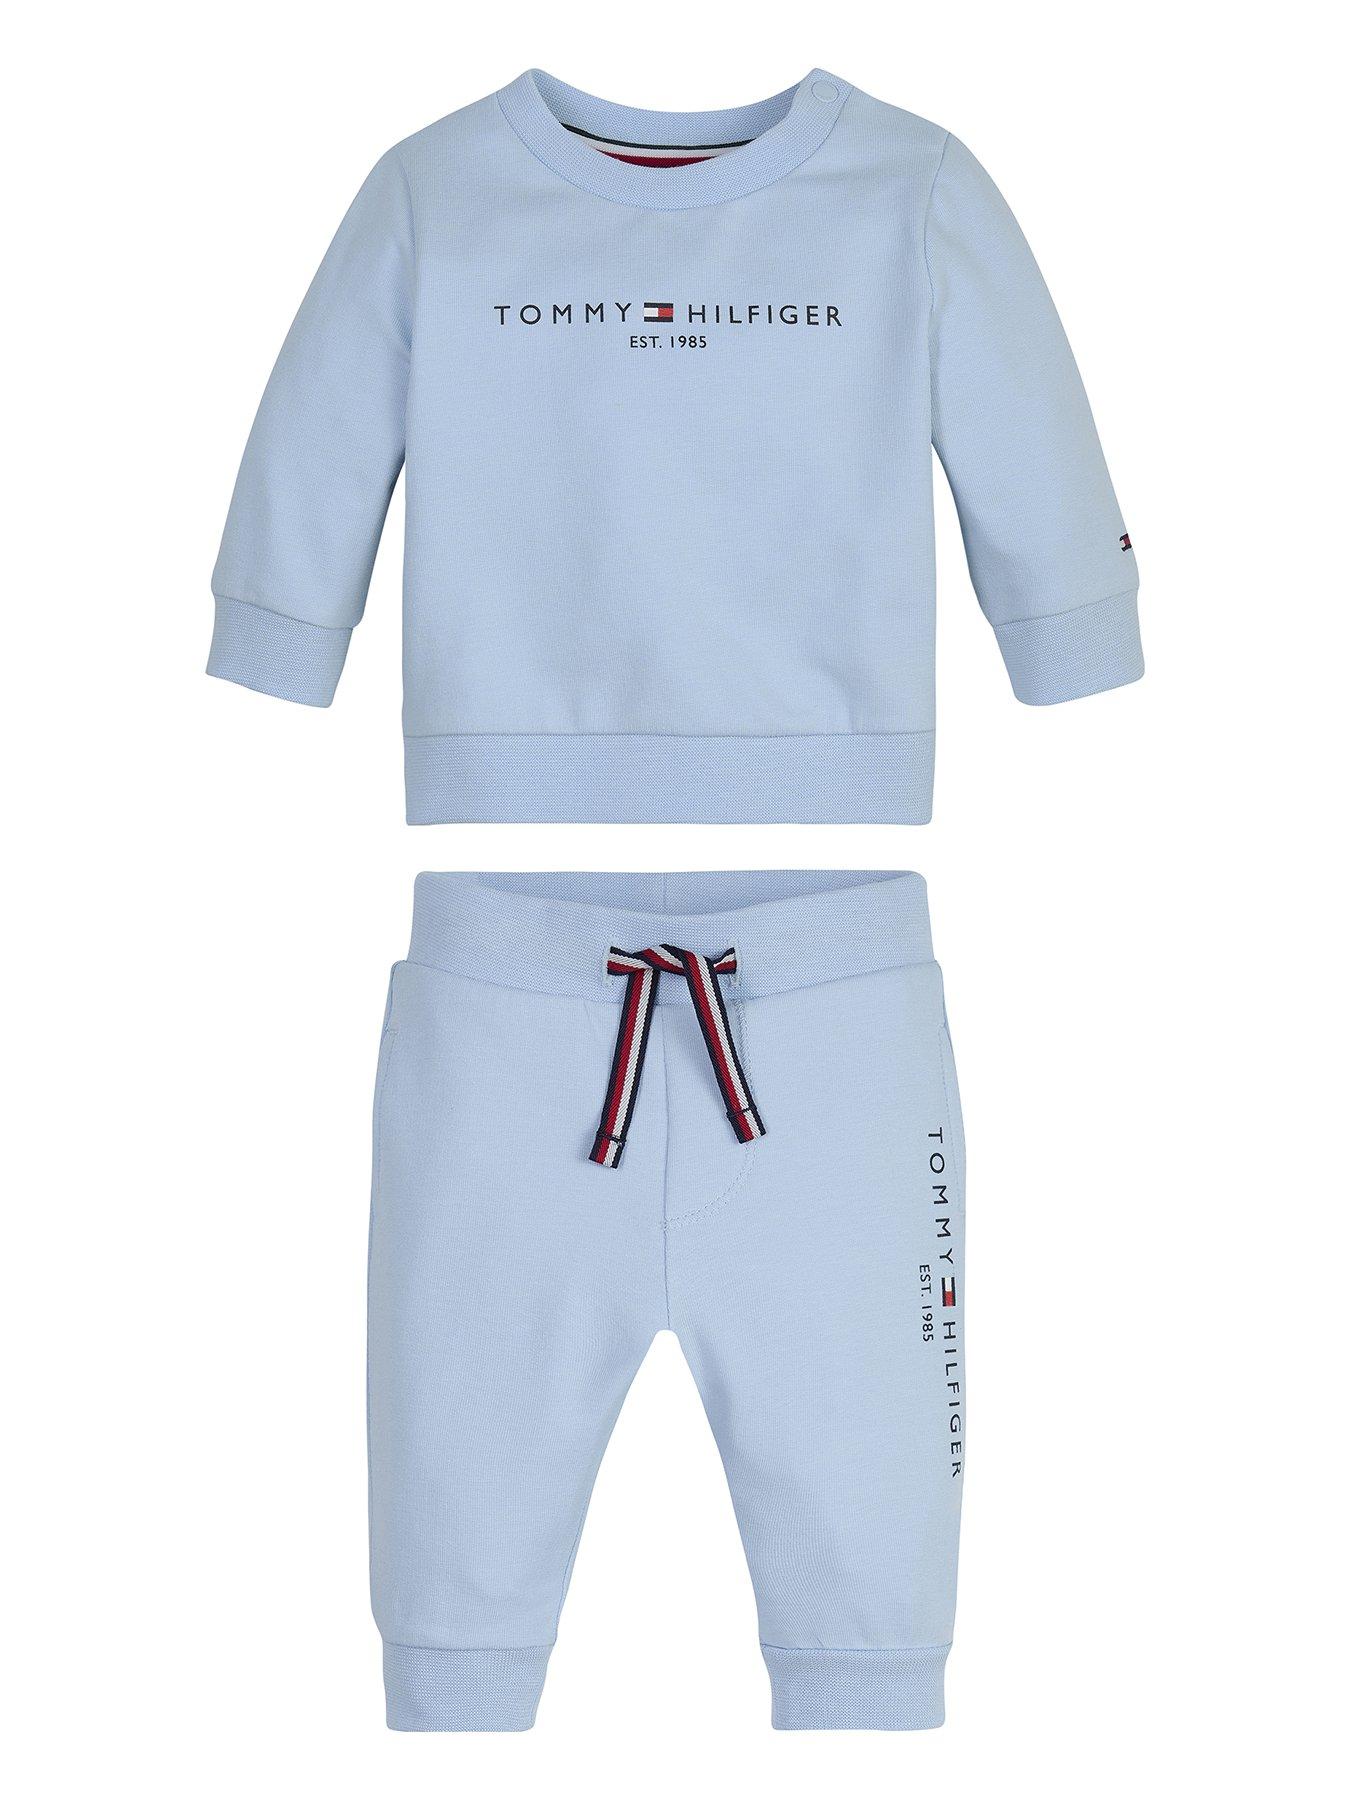 Tommy Hilfiger Baby Essential Crewneck Set - Chambray Sky | very.co.uk